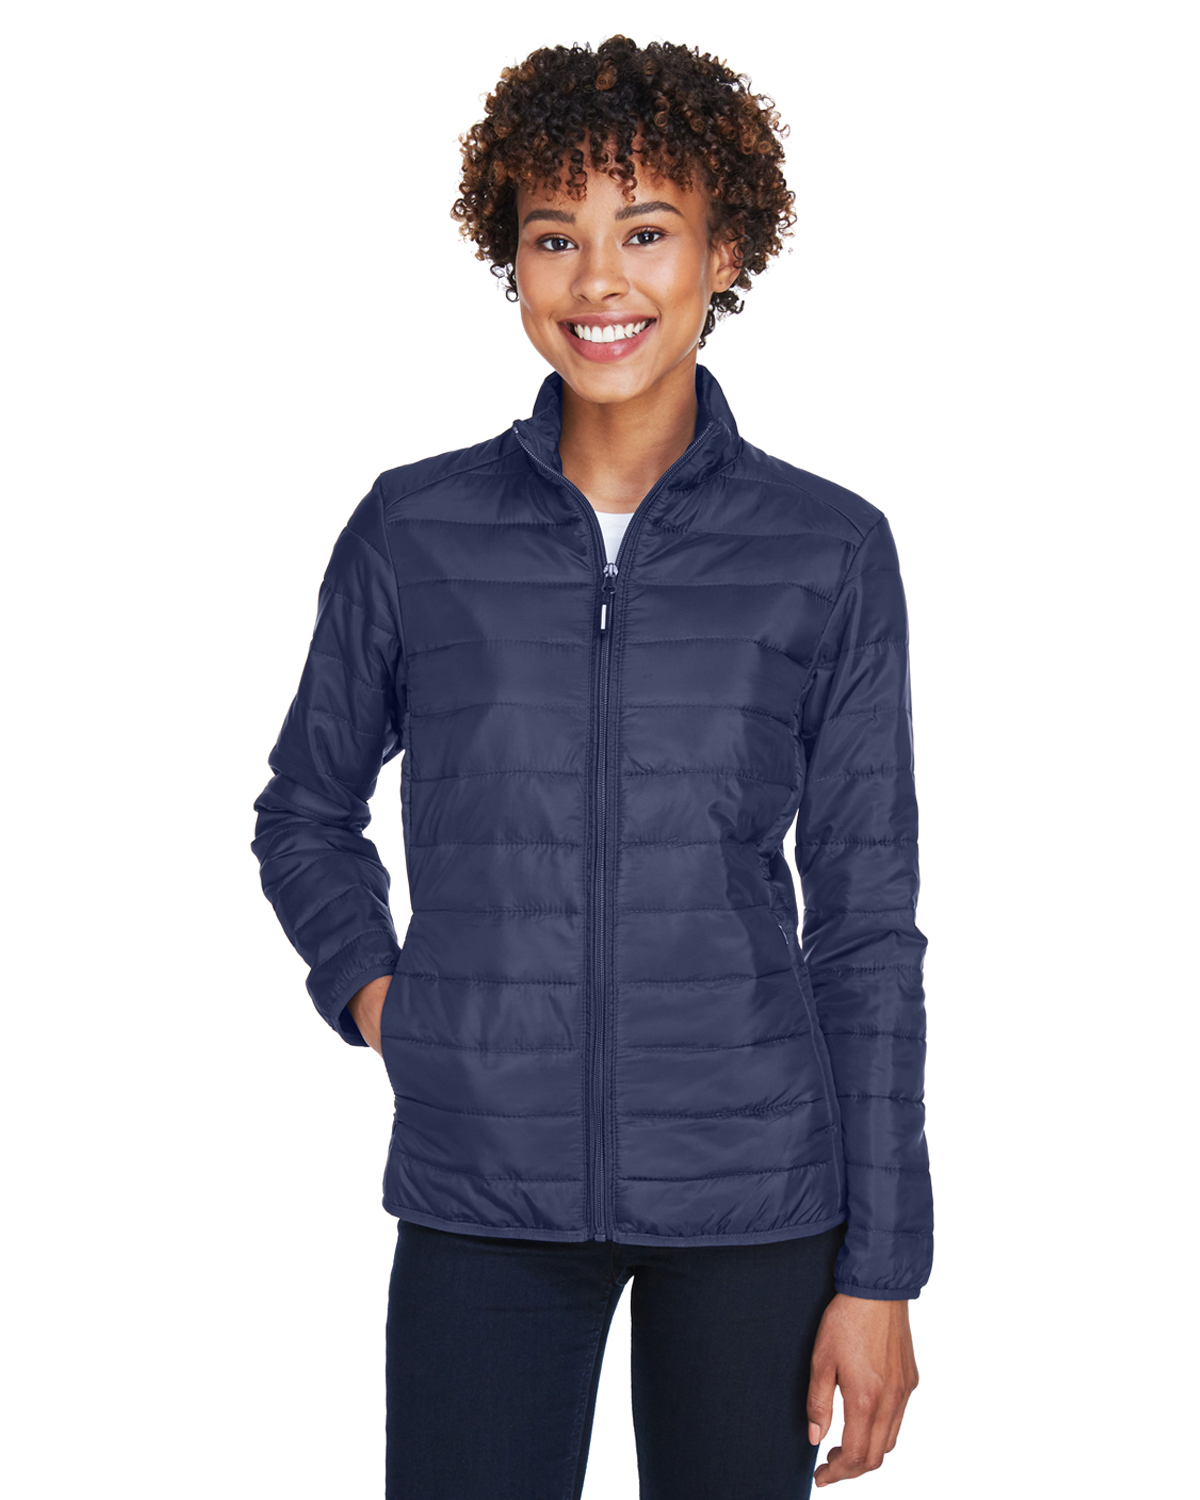 Ladies' Prevail Packable Puffer Jacket - CLASSIC NAVY - S - image 1 of 3